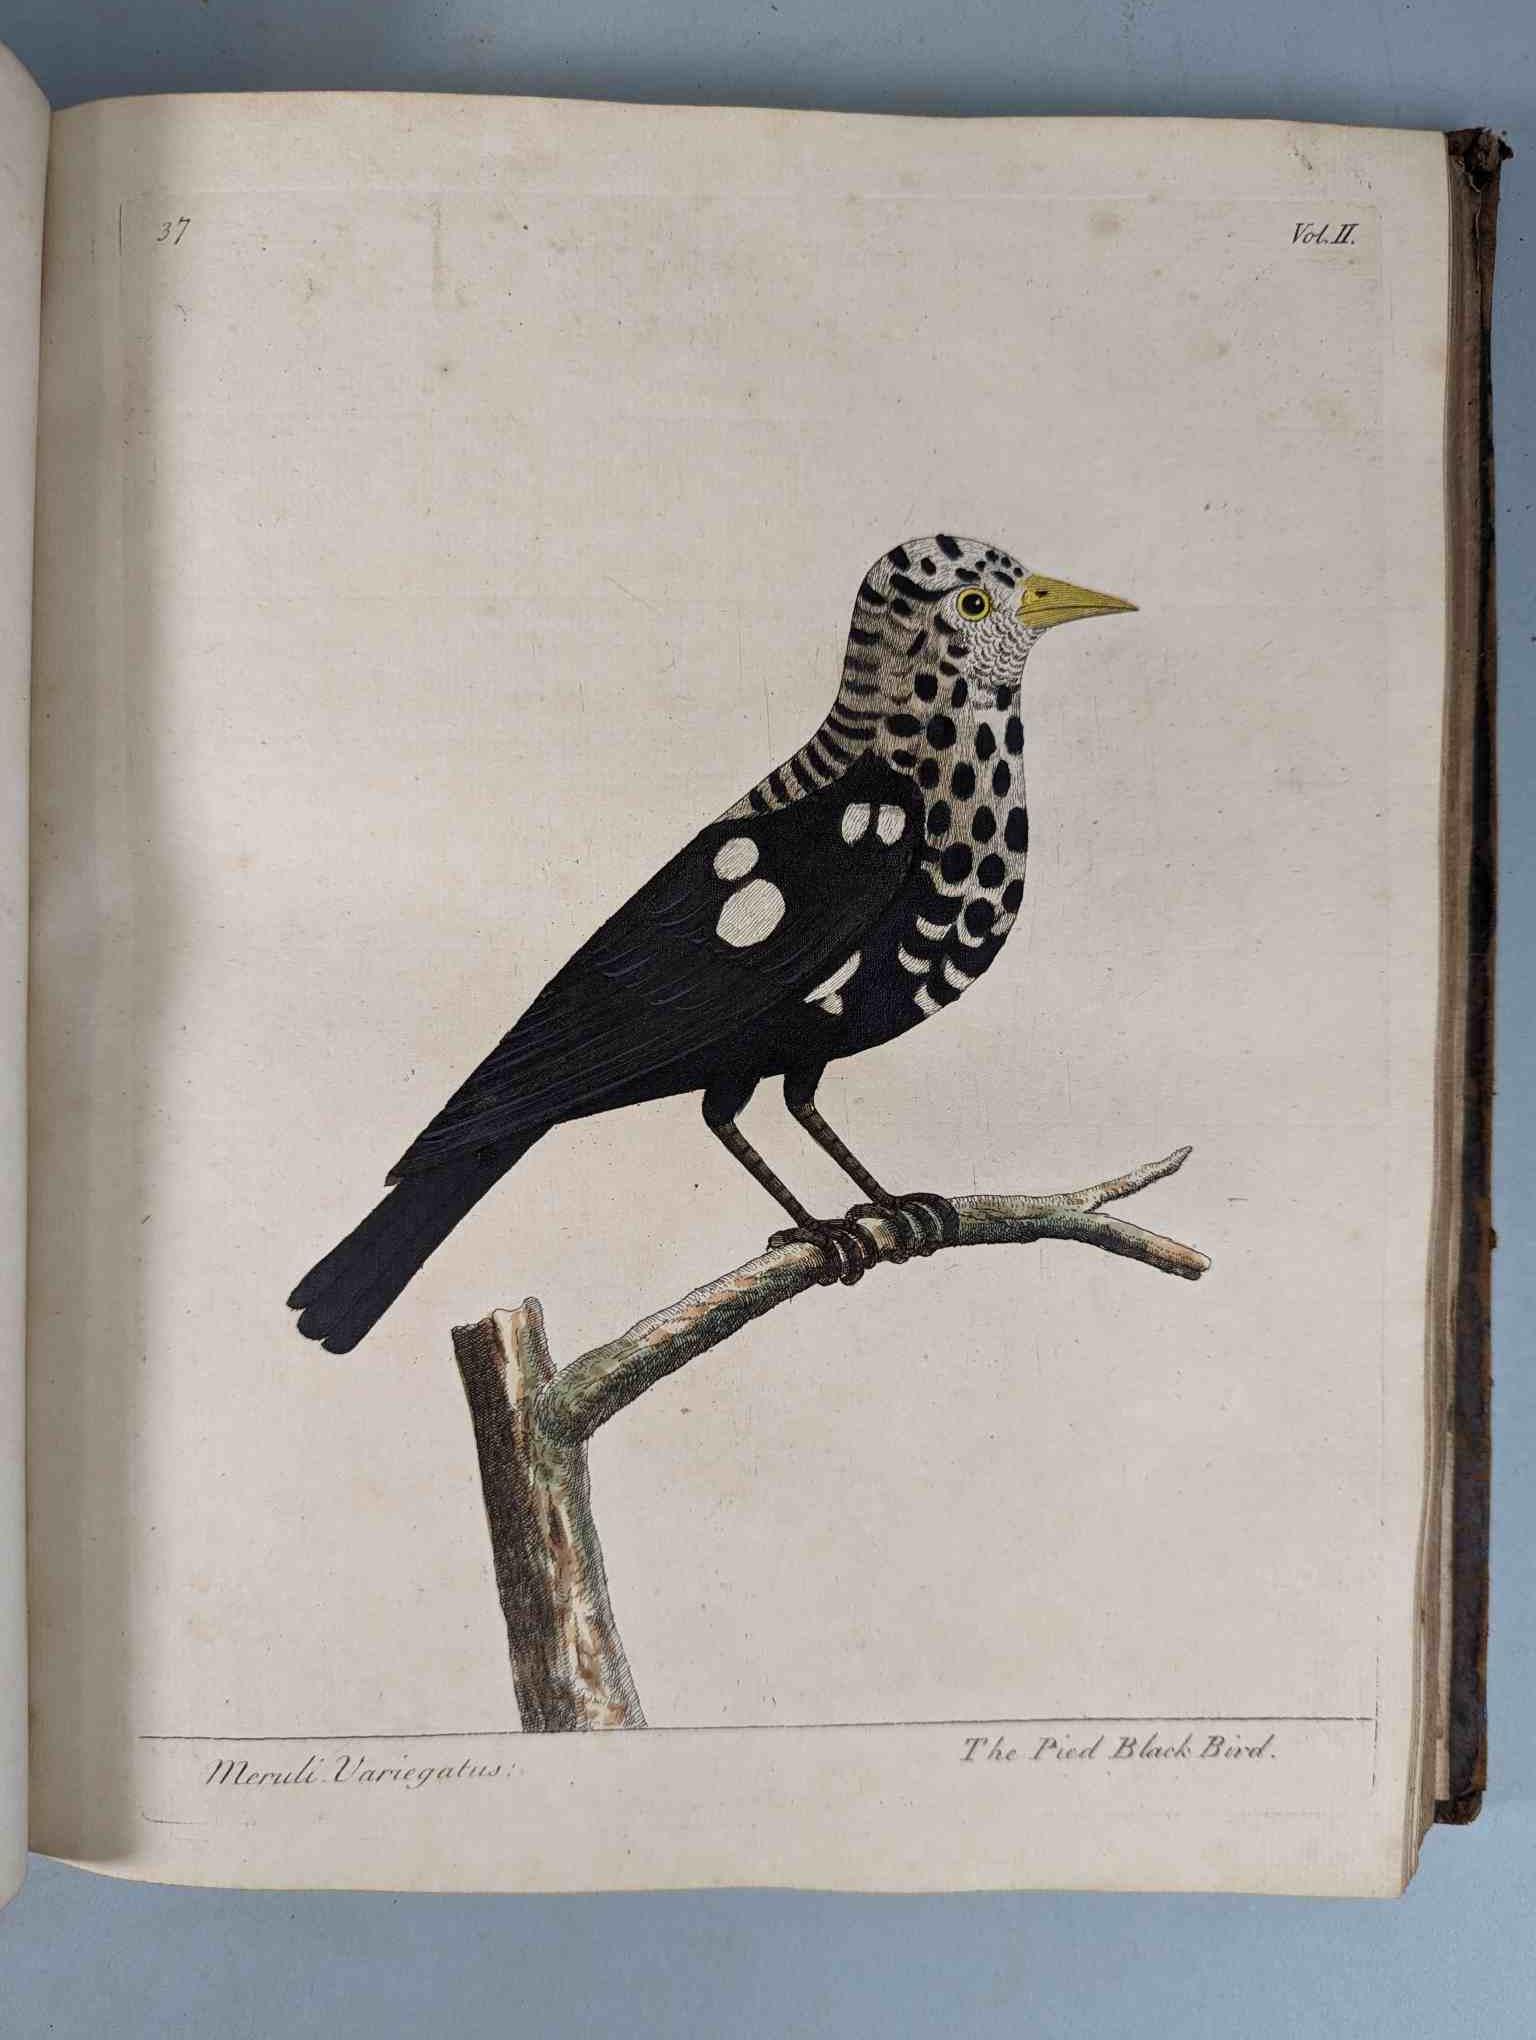 ALBIN, Eleazar. A Natural History of Birds, to which are added, Notes and Observations by W. - Image 141 of 208